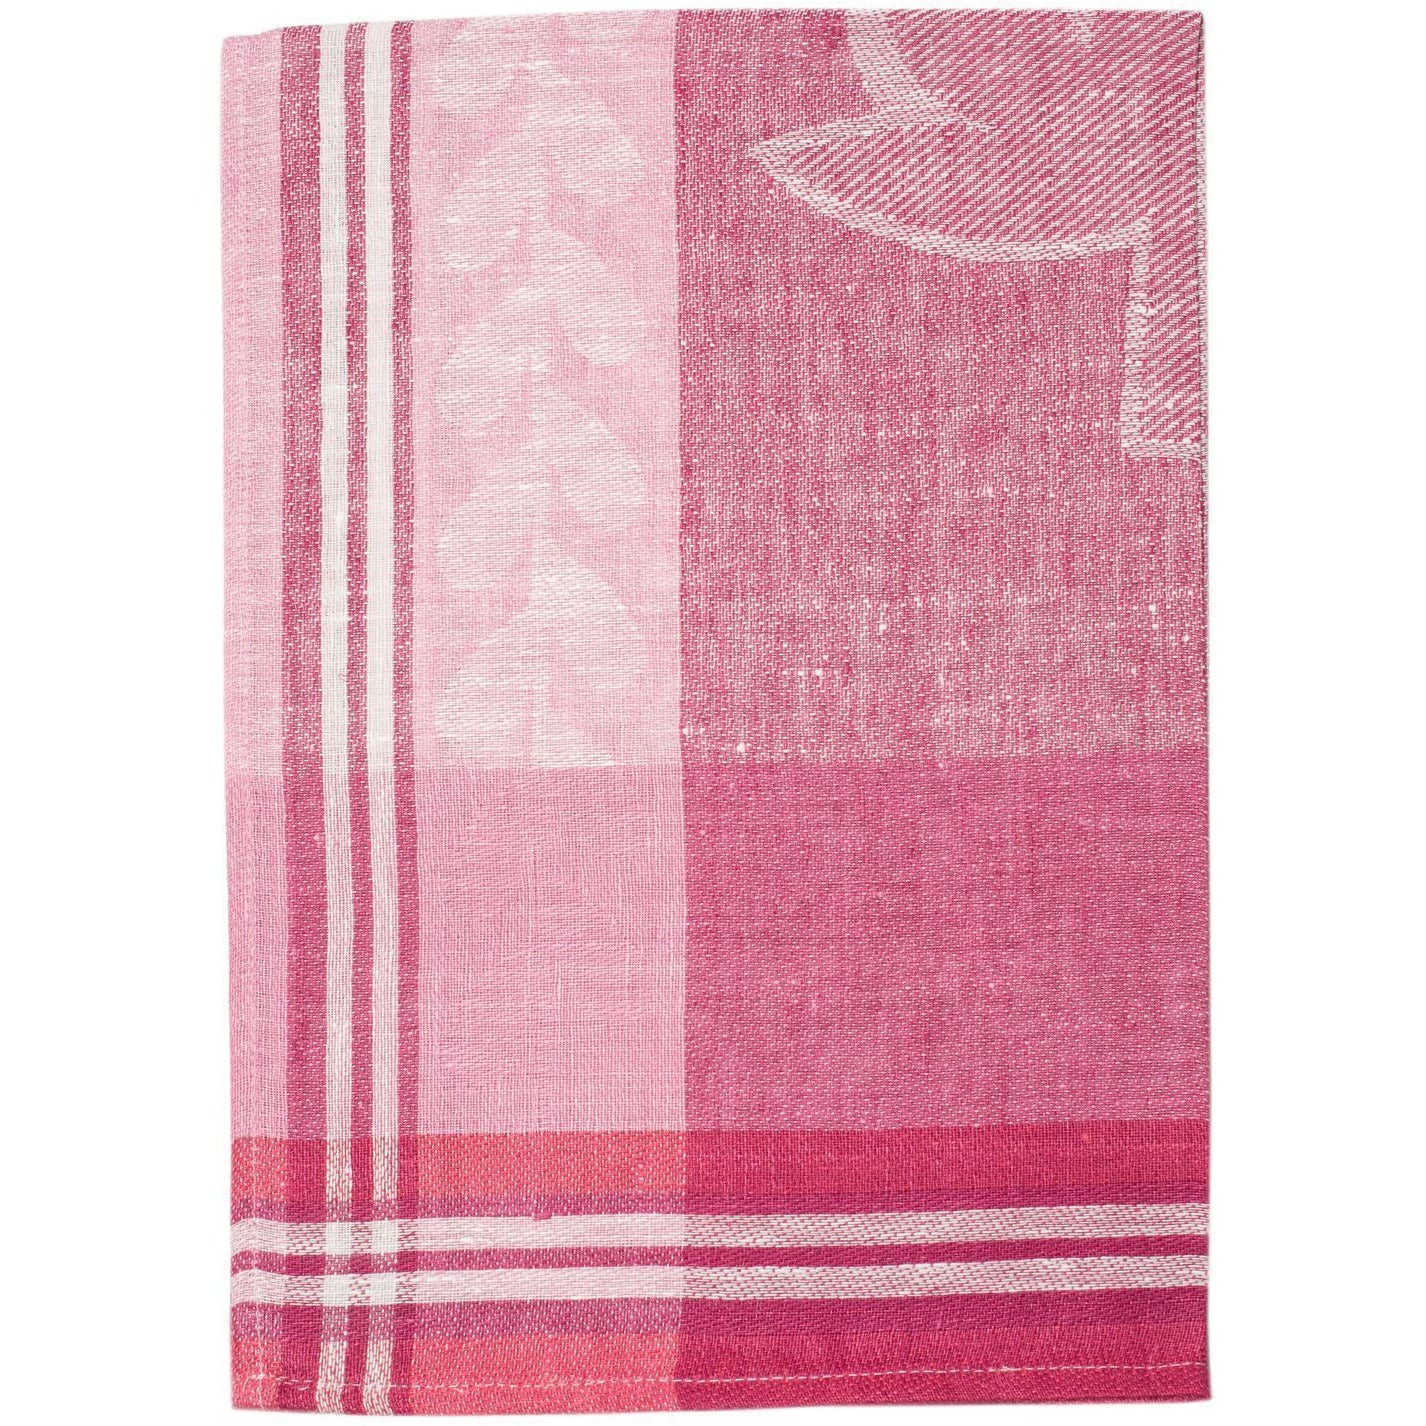 strawberry fields tea towel ruby red / pink / white